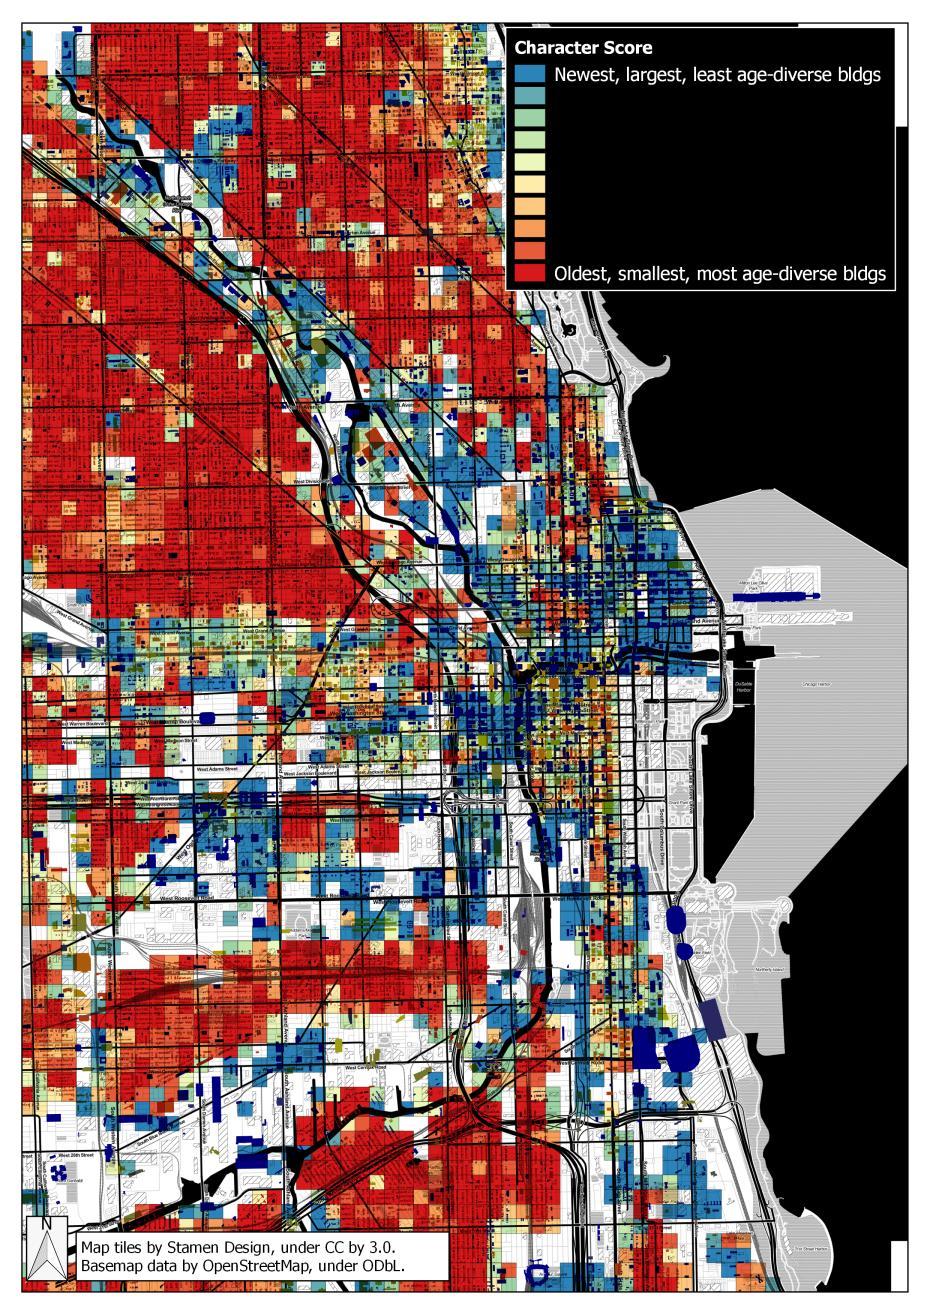 Analyzing the Built Fabric of Chicago The Character Score shows areas with older, smaller buildings and greater